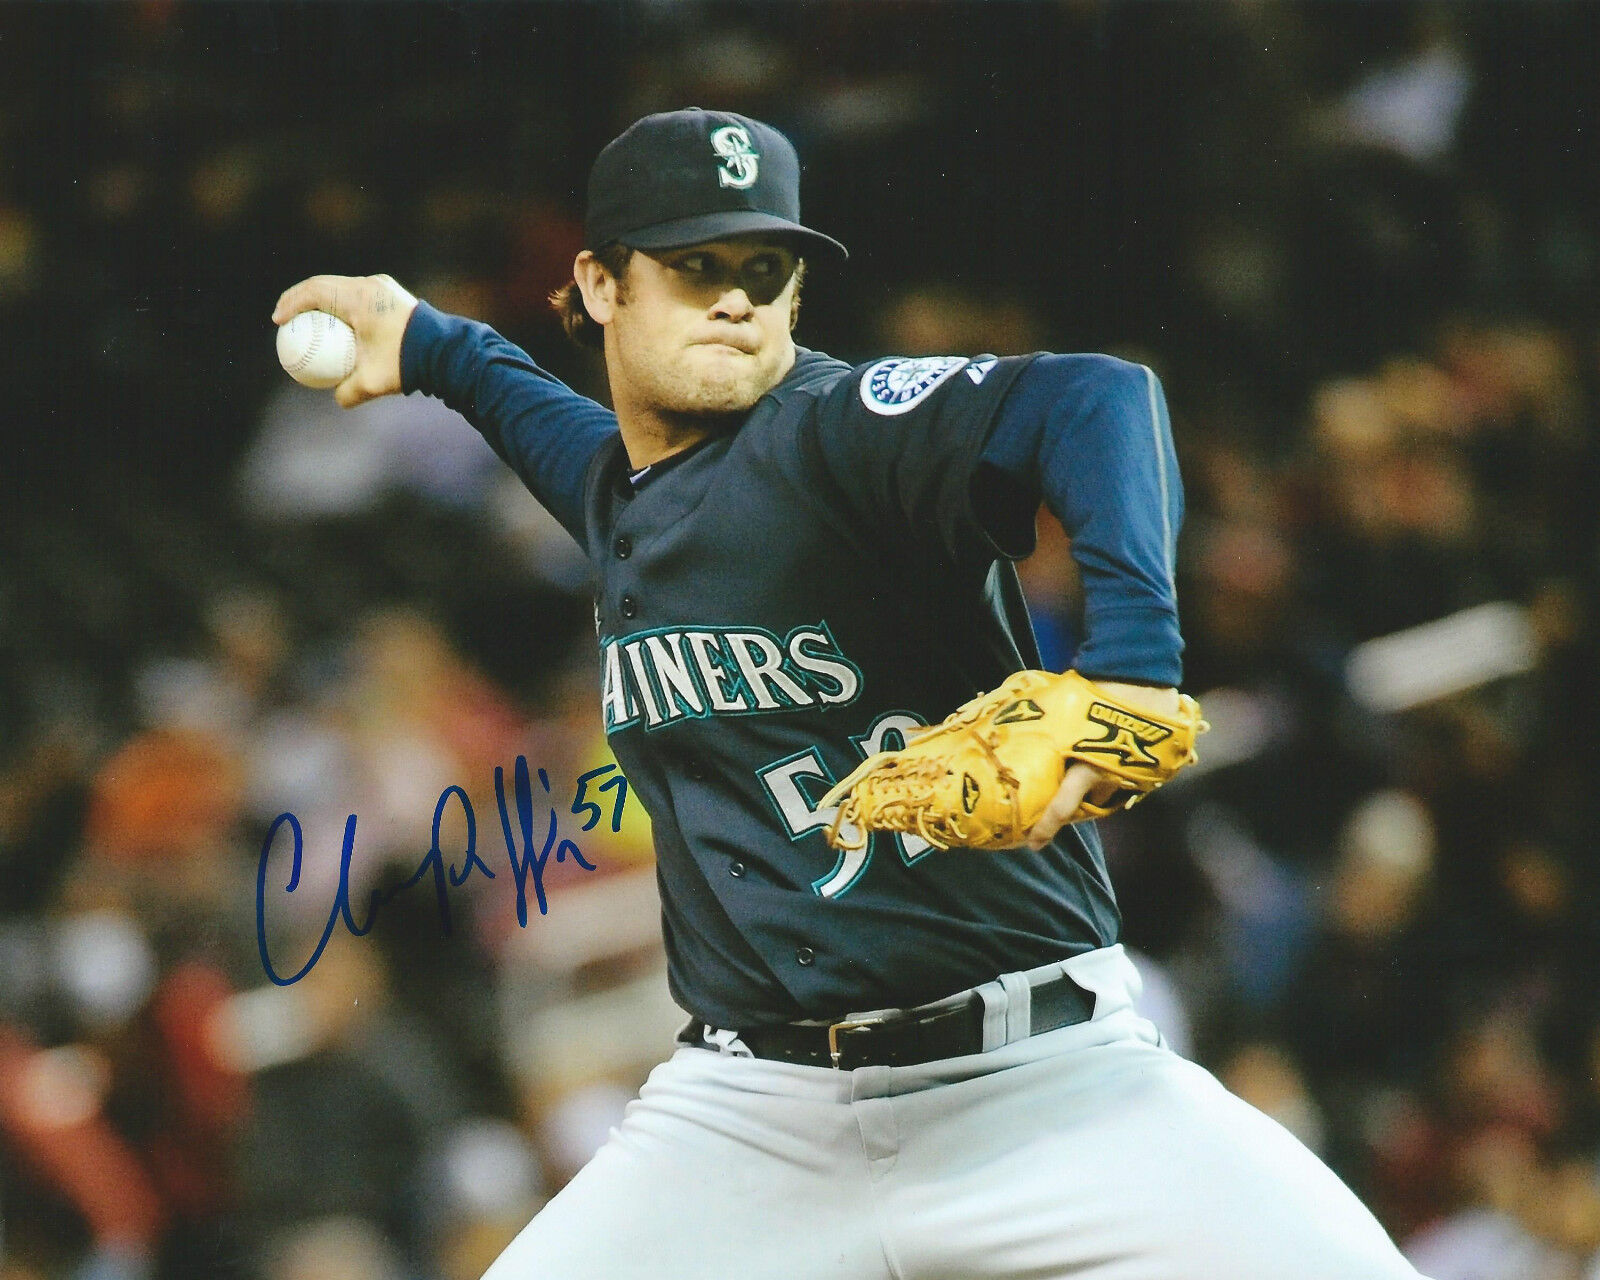 **GFA Seattle Mariners *CHANCE RUFFIN* Signed 8x10 Photo Poster painting C2 COA**